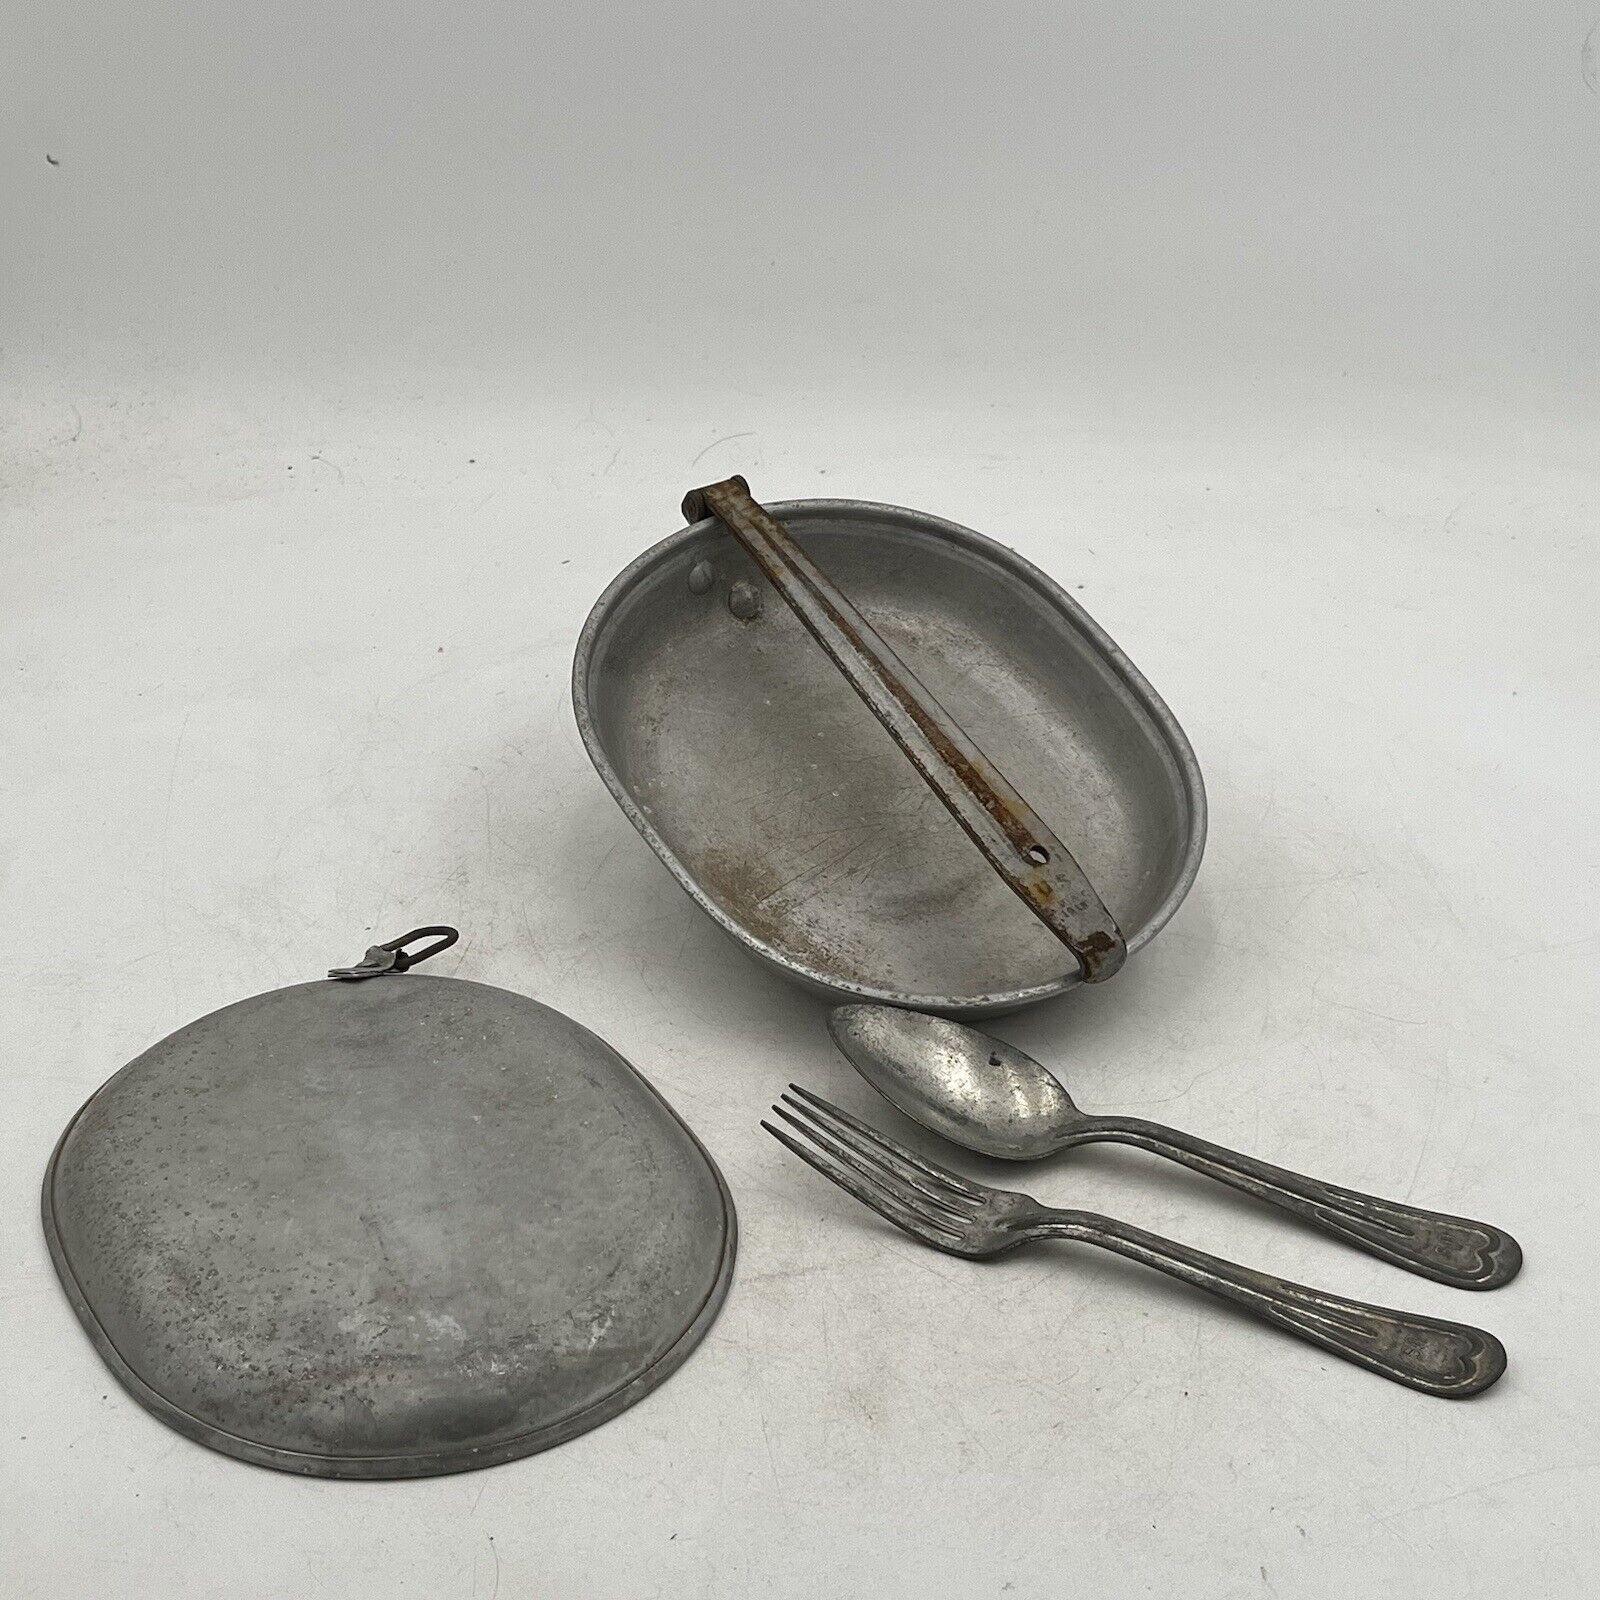 ORIGINAL WWI US ARMY Military MESS KIT-DATED 1918 w/ Matching Fork & Spoon